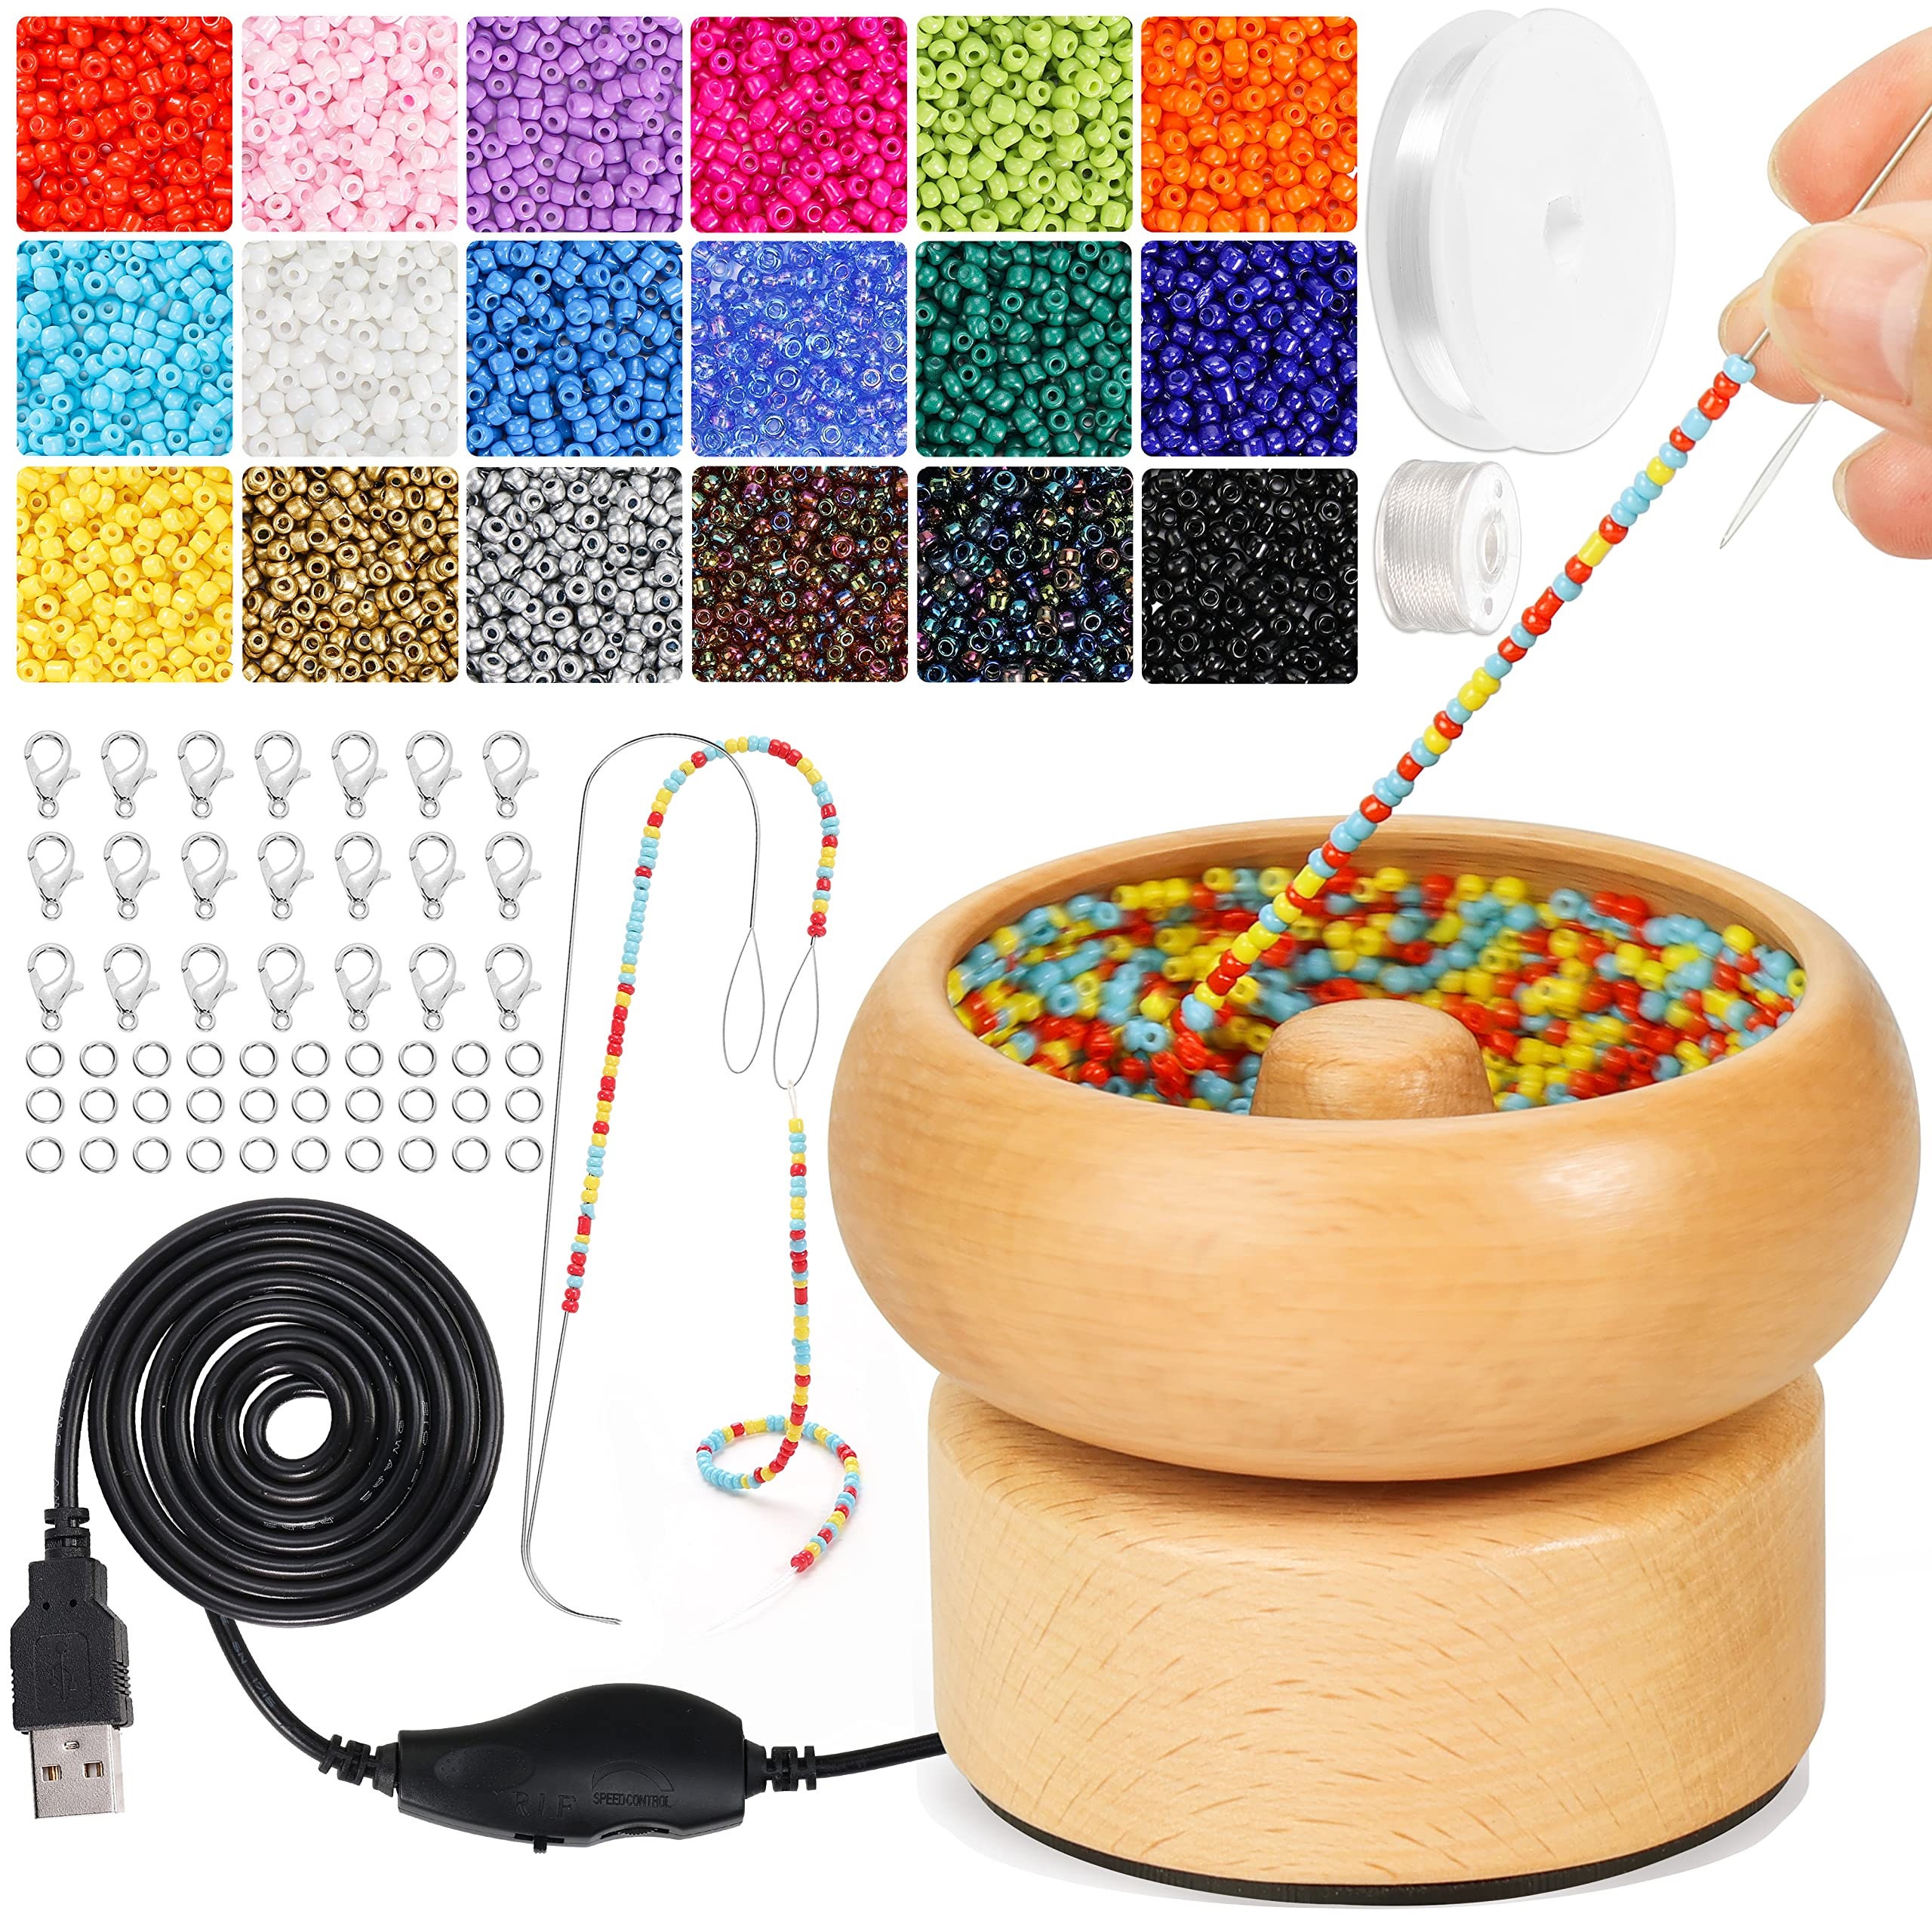 1set Diy Jewelry Making Tools Including 1 Bead Spinner, 1 Roll Of Elastic  Cord, 1 Needle Threader, 2 Bead Needles, 1 Pack Of Alphabet Beads, 3mm  Black/white/mixed Color Beads. Suitable For Quick